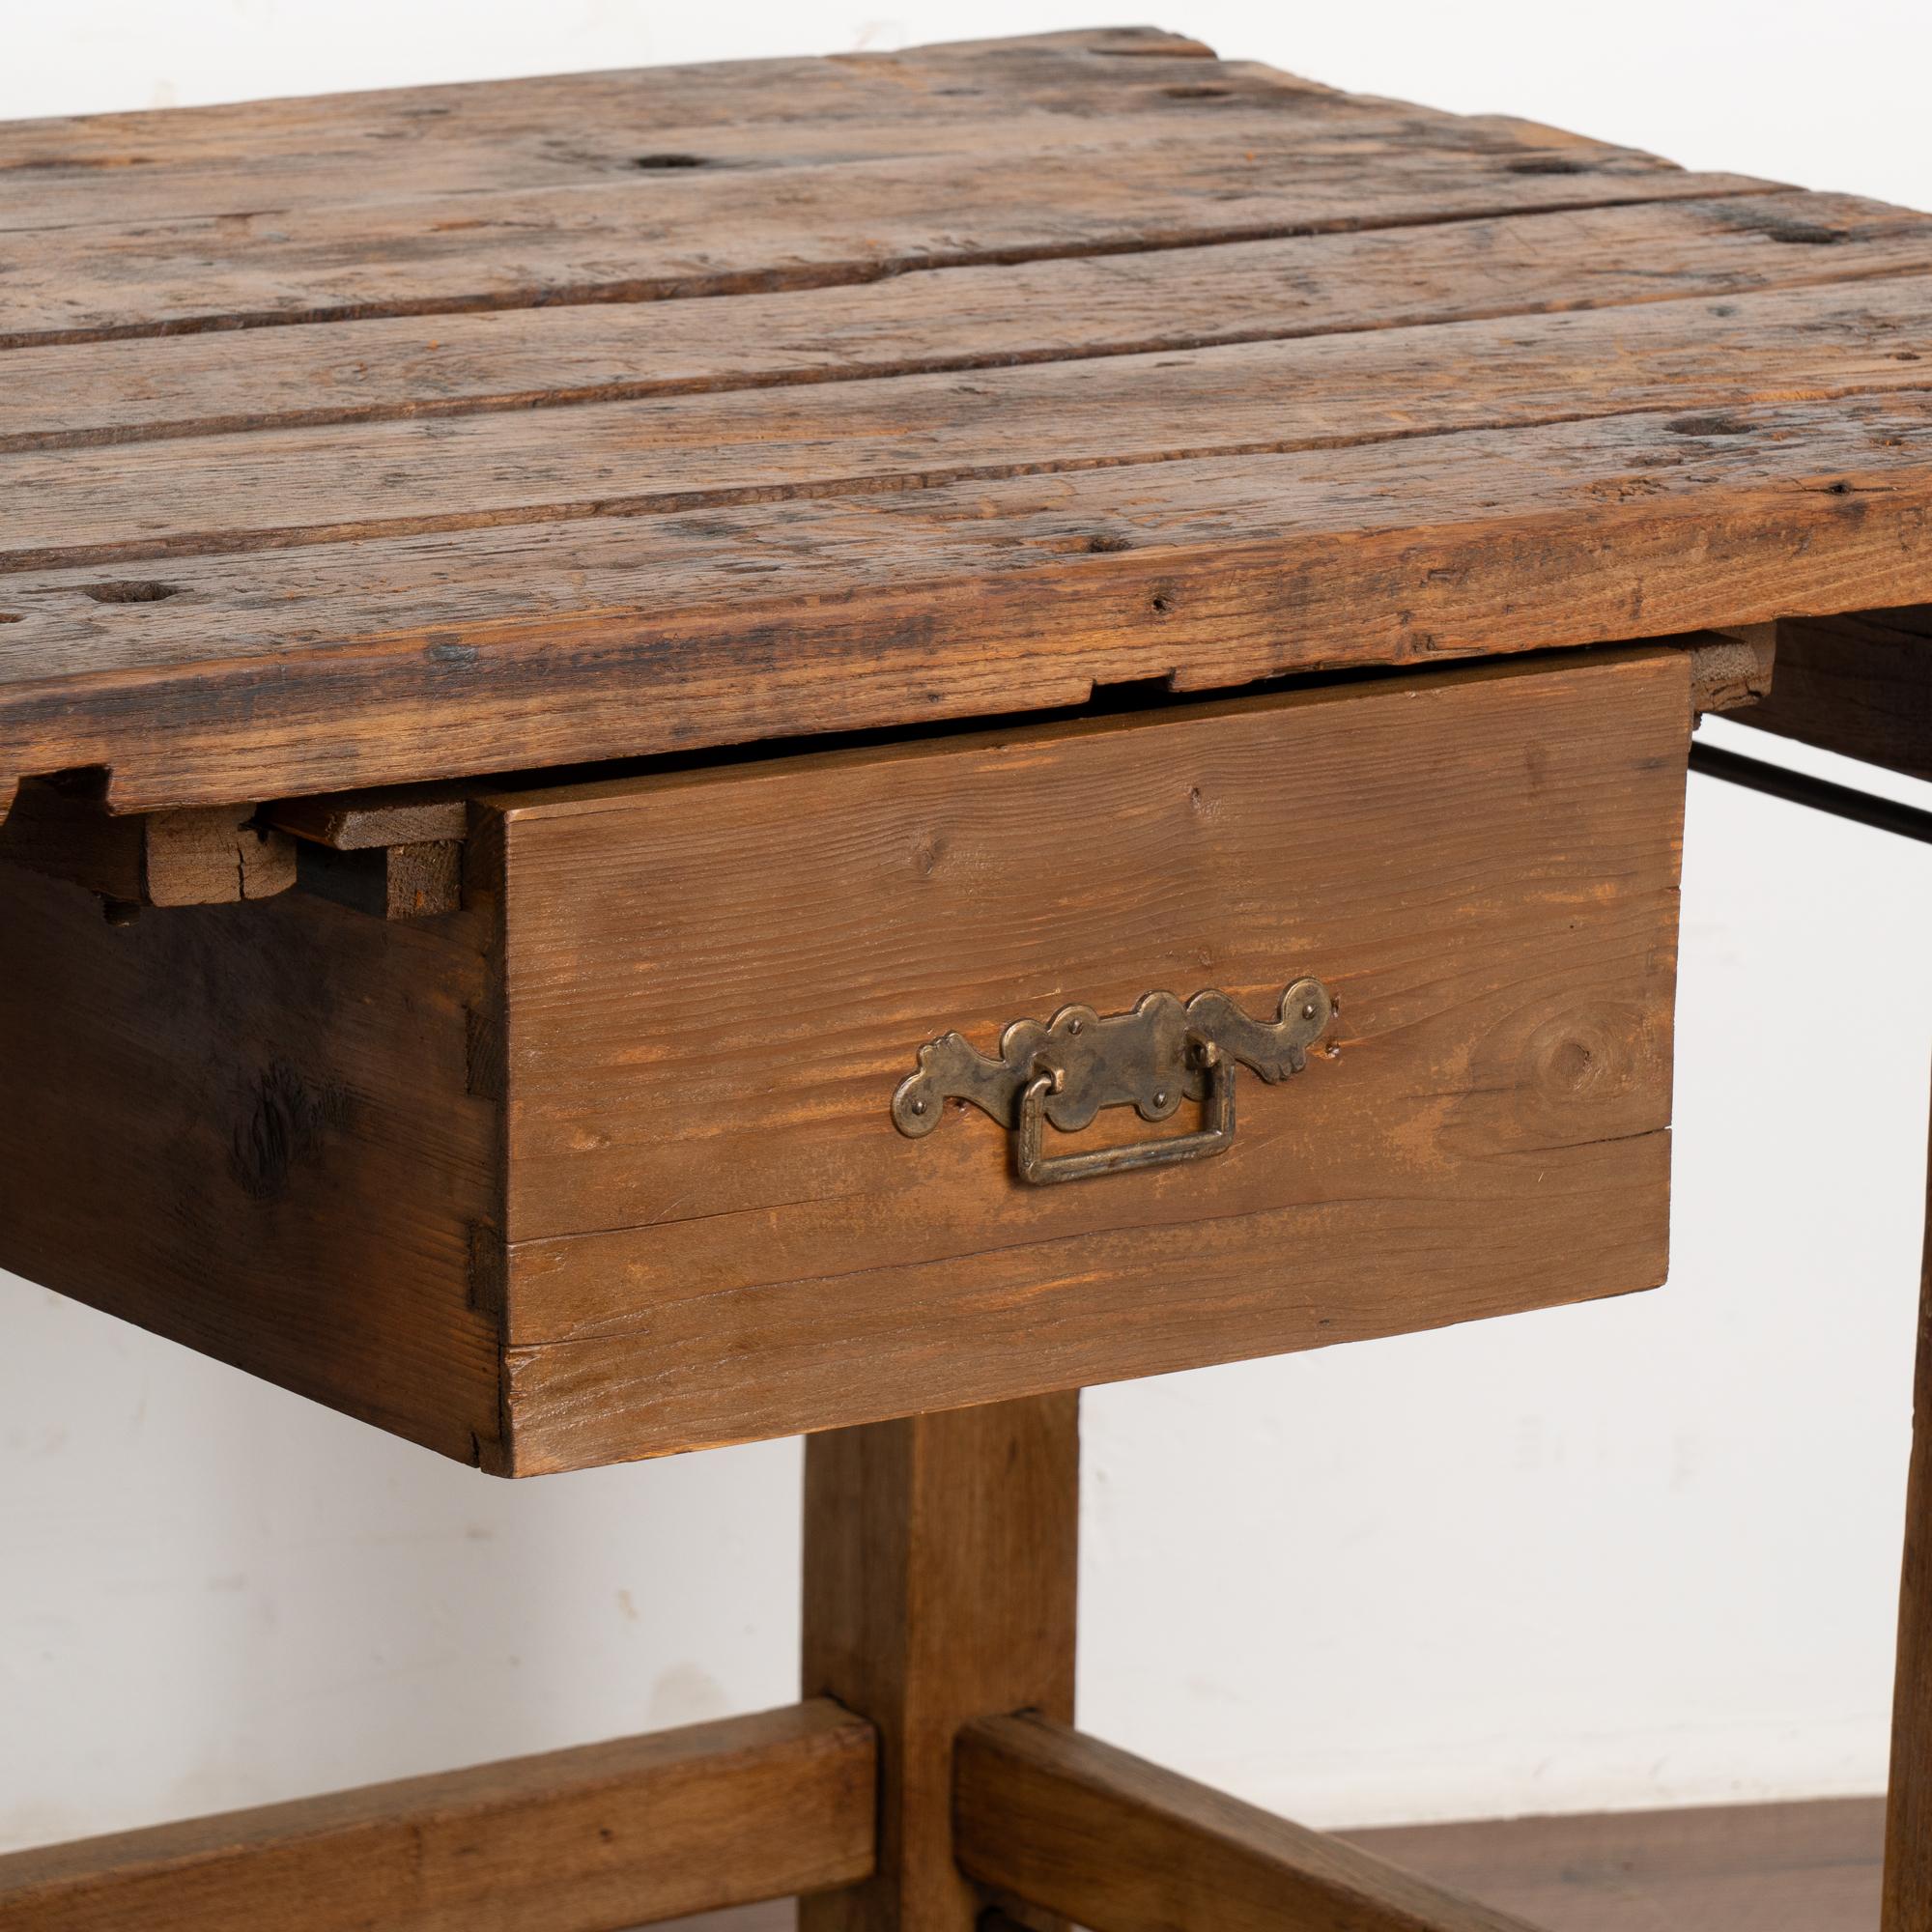 19th Century Antique Rustic Work Table With Two Drawers from Hungary circa 1880 For Sale